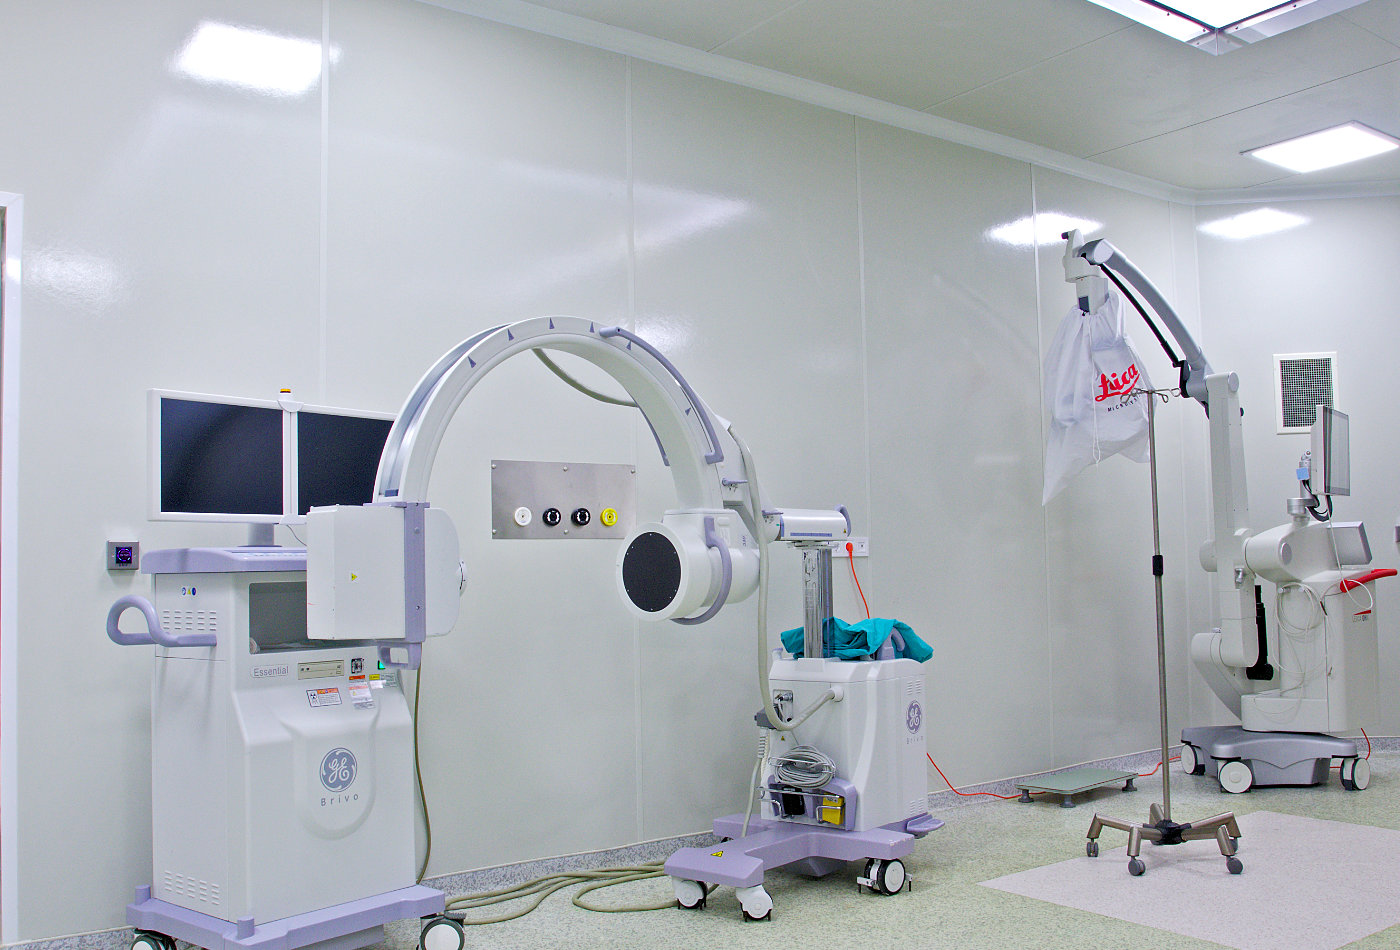 Fırat University operating rooms GRP hygienic walls, dropped ceilings